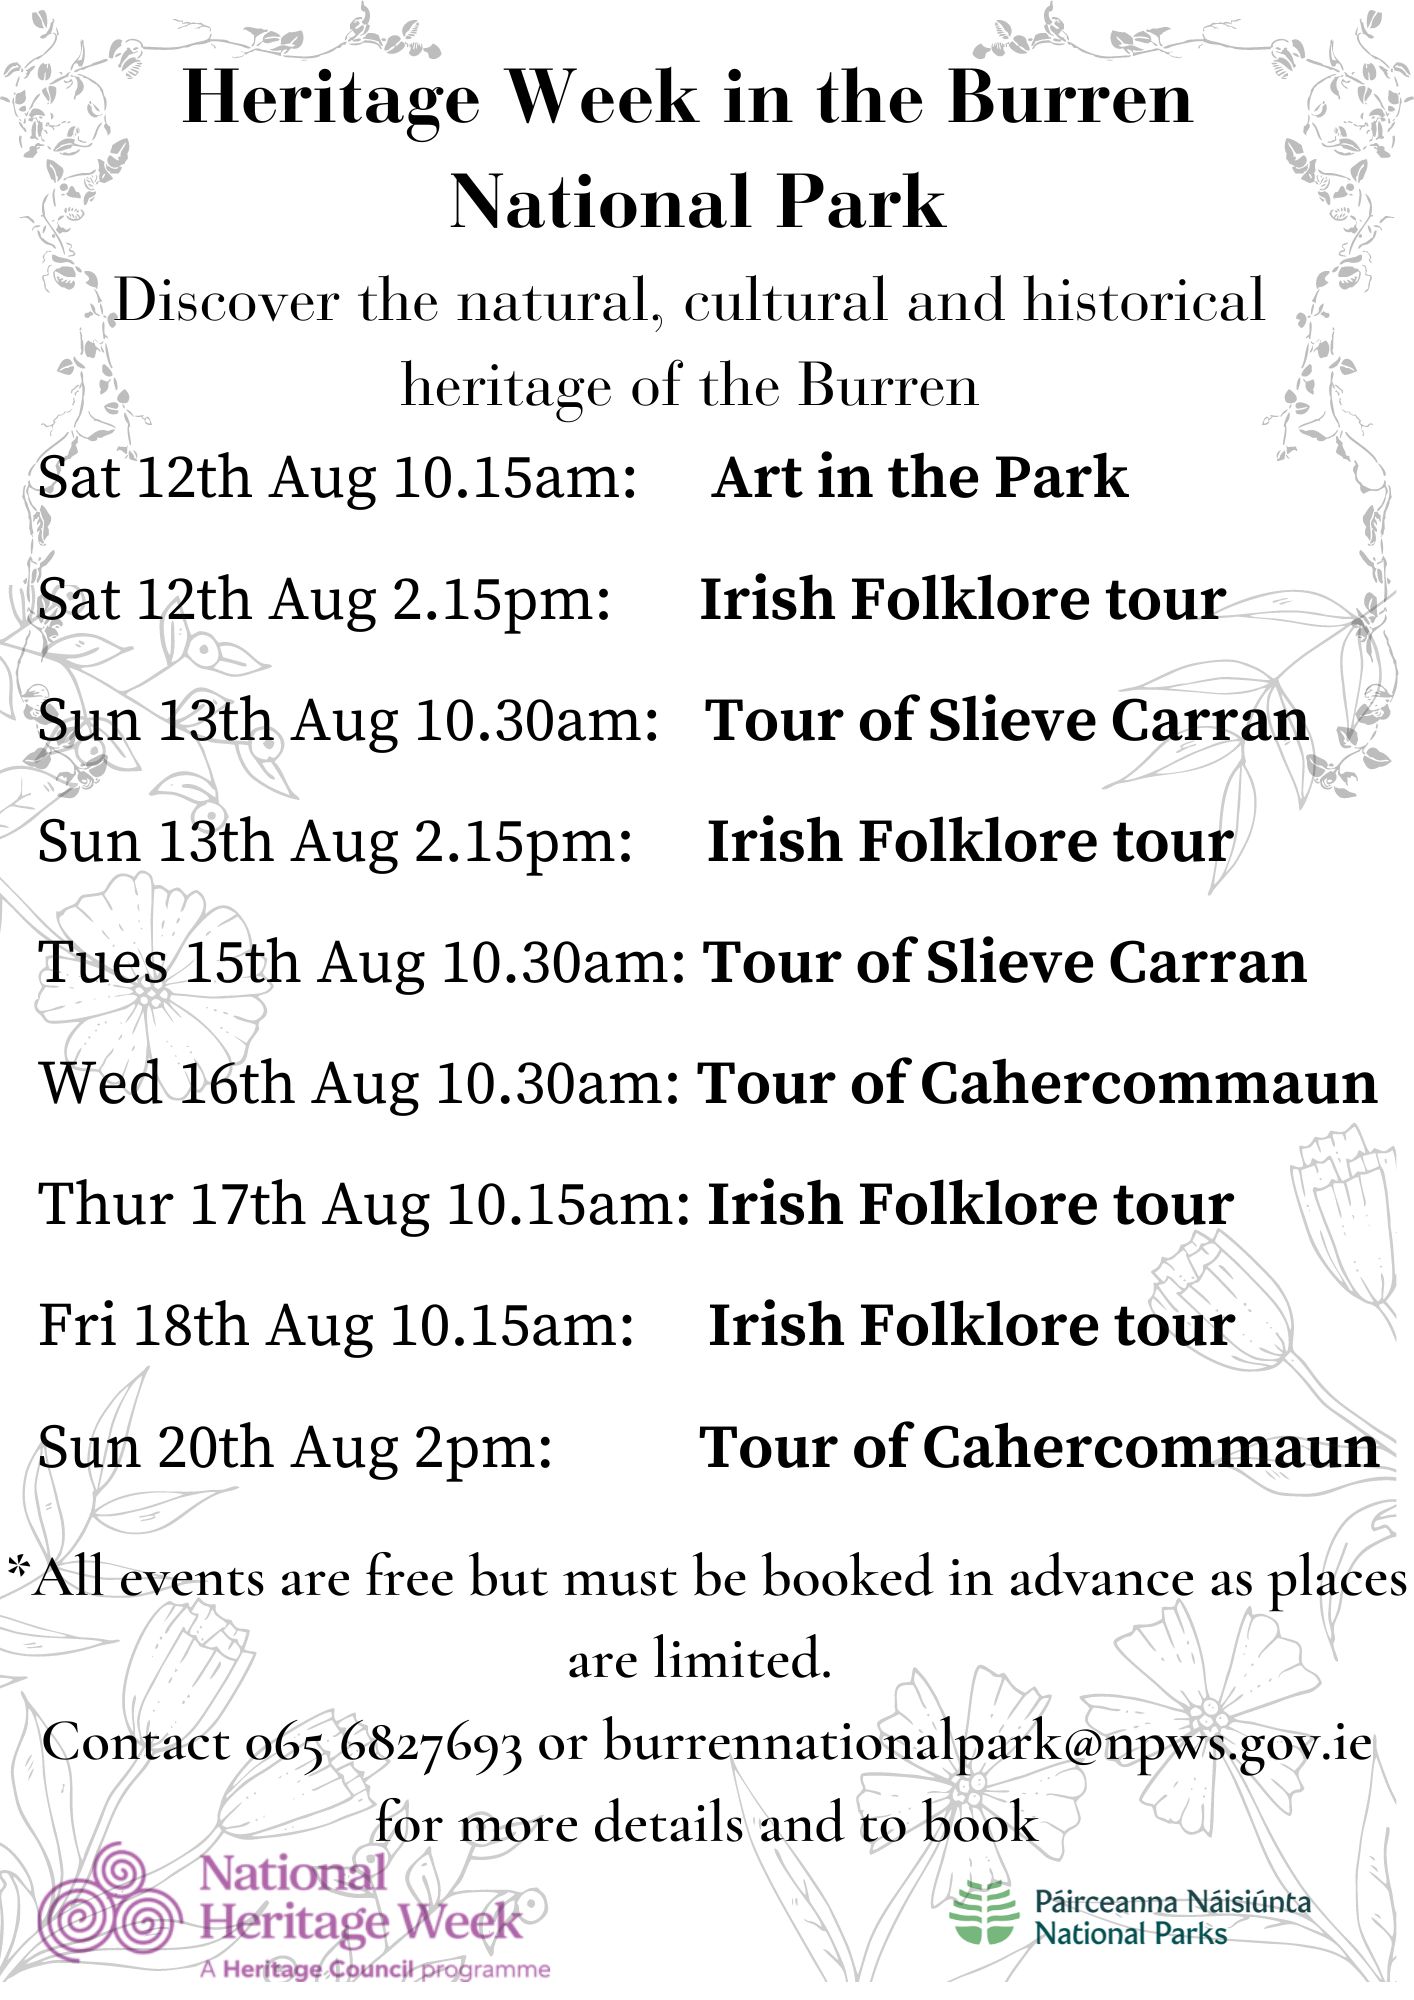 Heritage Week Events - National Parks of Ireland